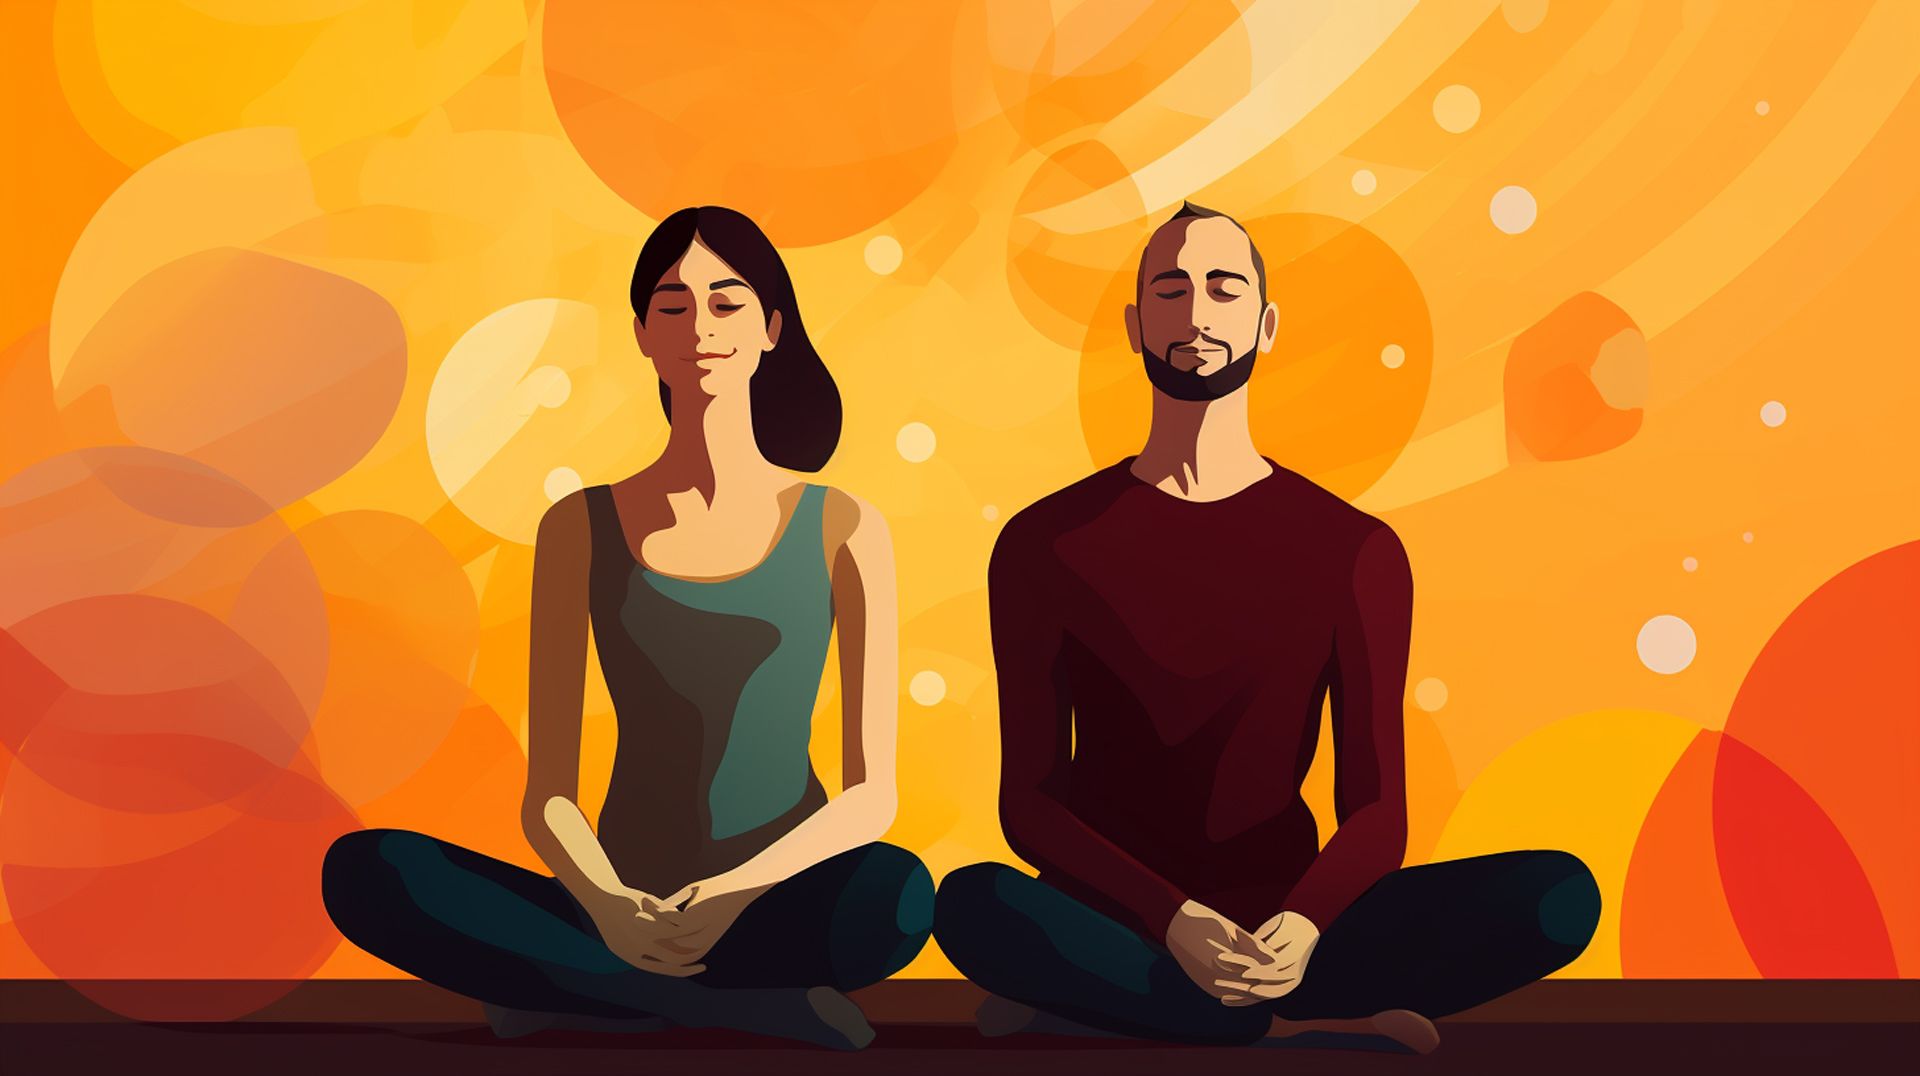 a man and woman sitting next to each other in meditative pose